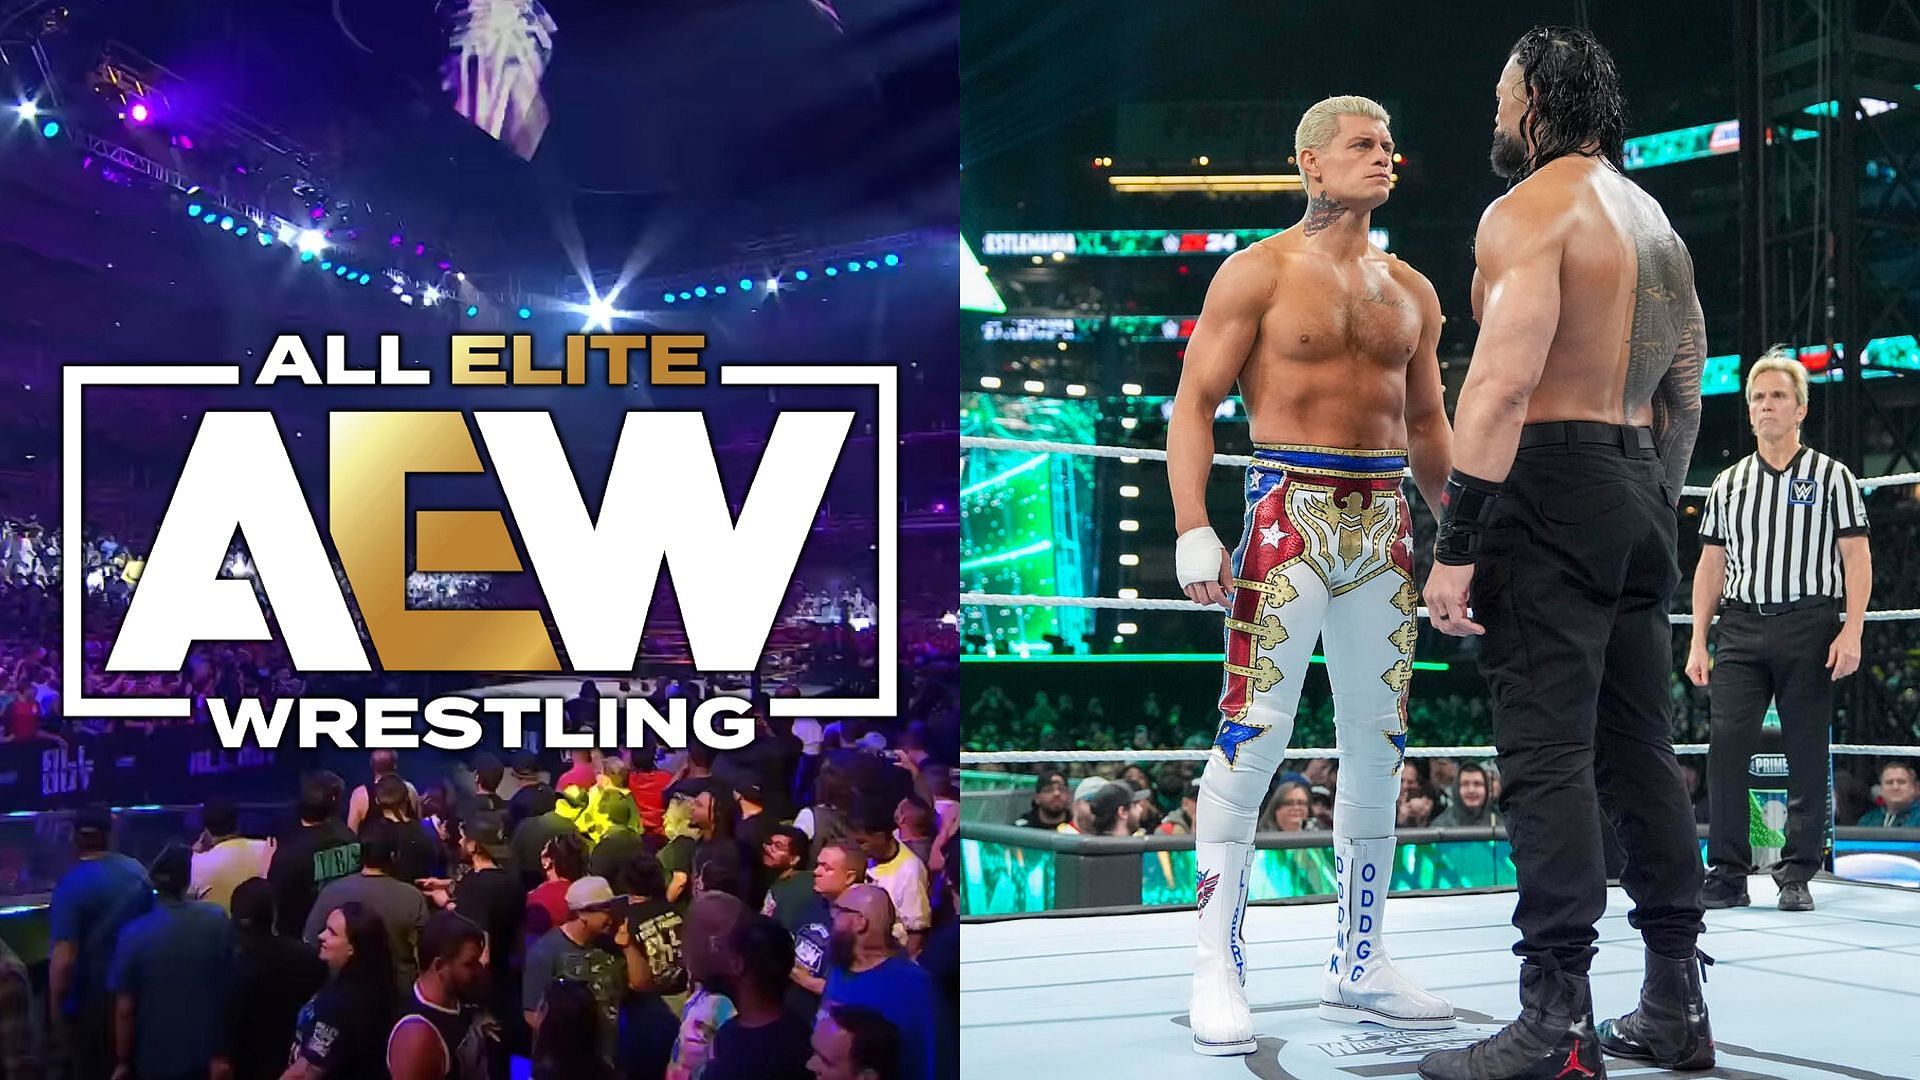 Could AEW produce a match like Rhodes vs. Reigns? (image credits: All Elite Wrestling on YouTube / WWE.com)